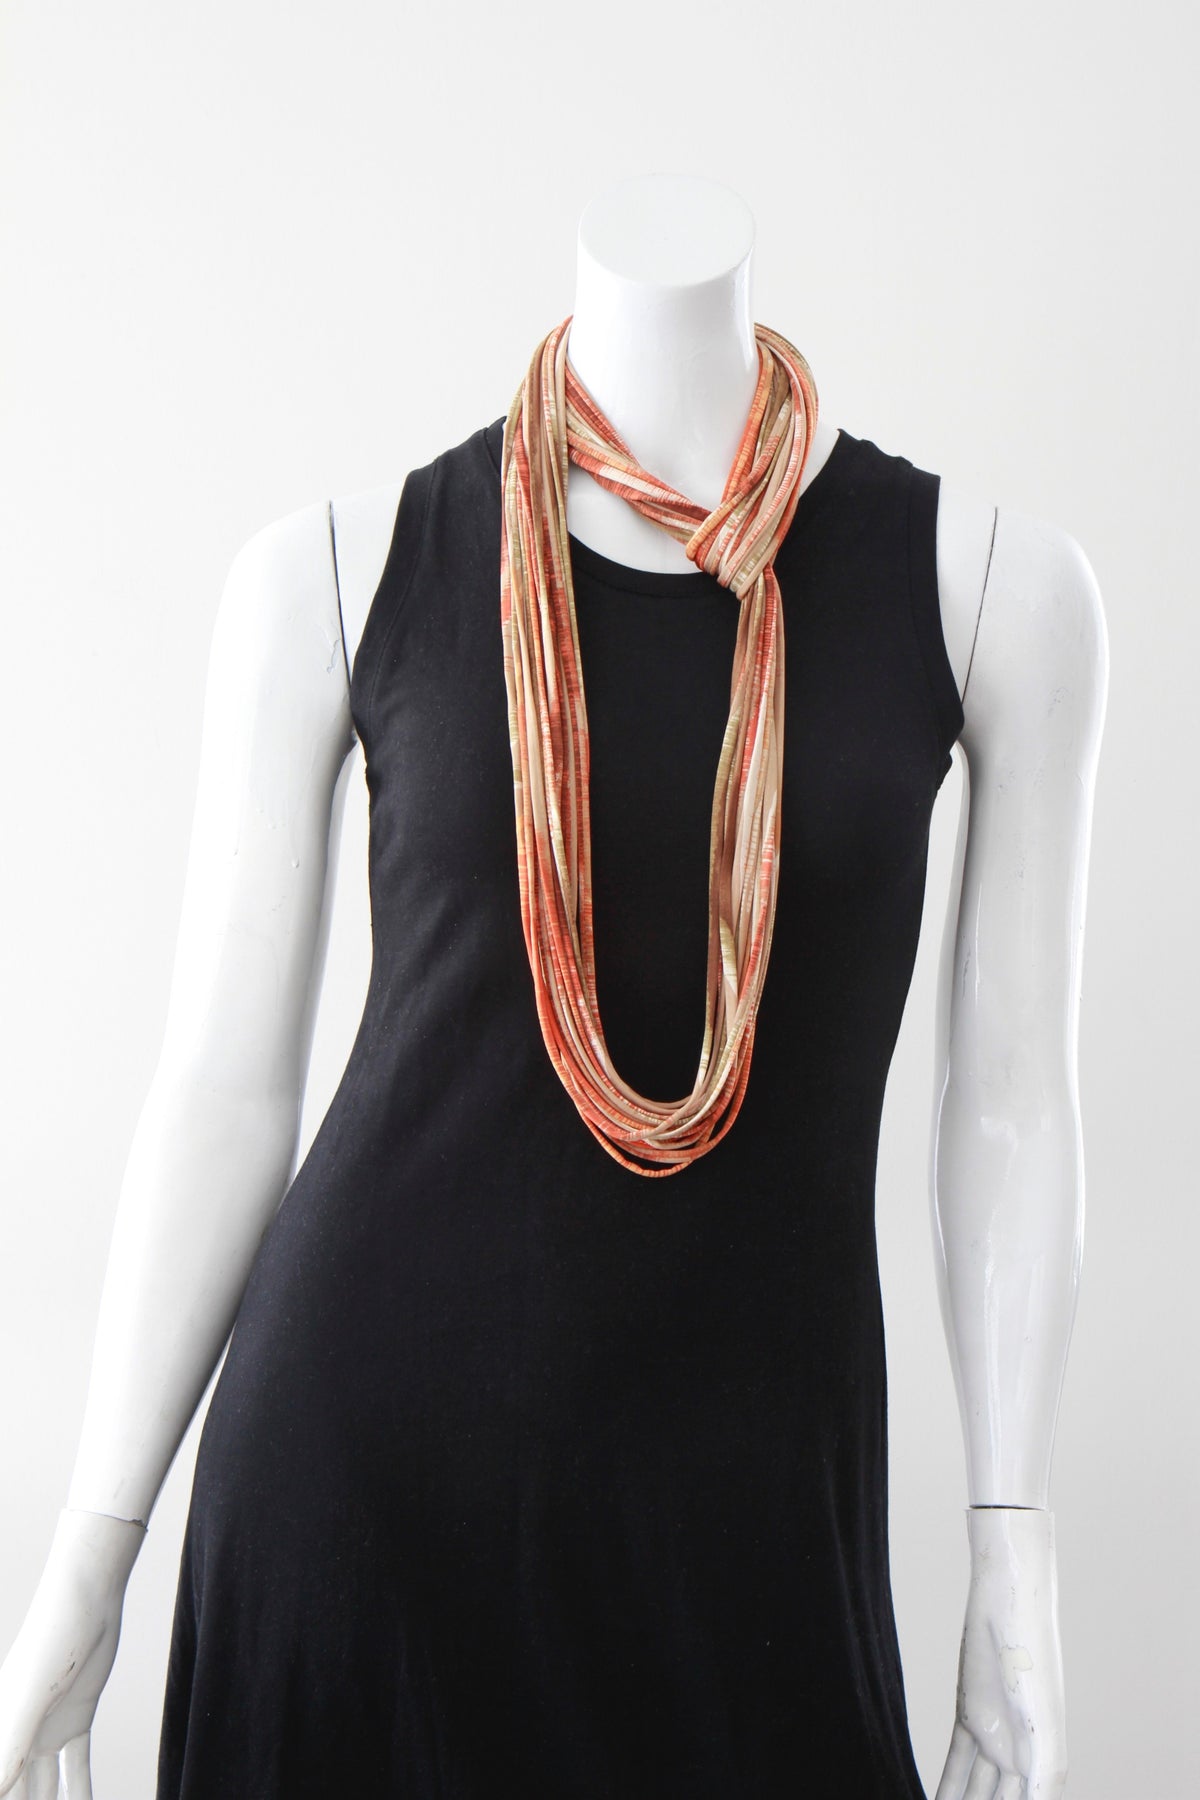 Orange and Tan Infinity Scarf Necklace &#39;Blurred Lines&#39;